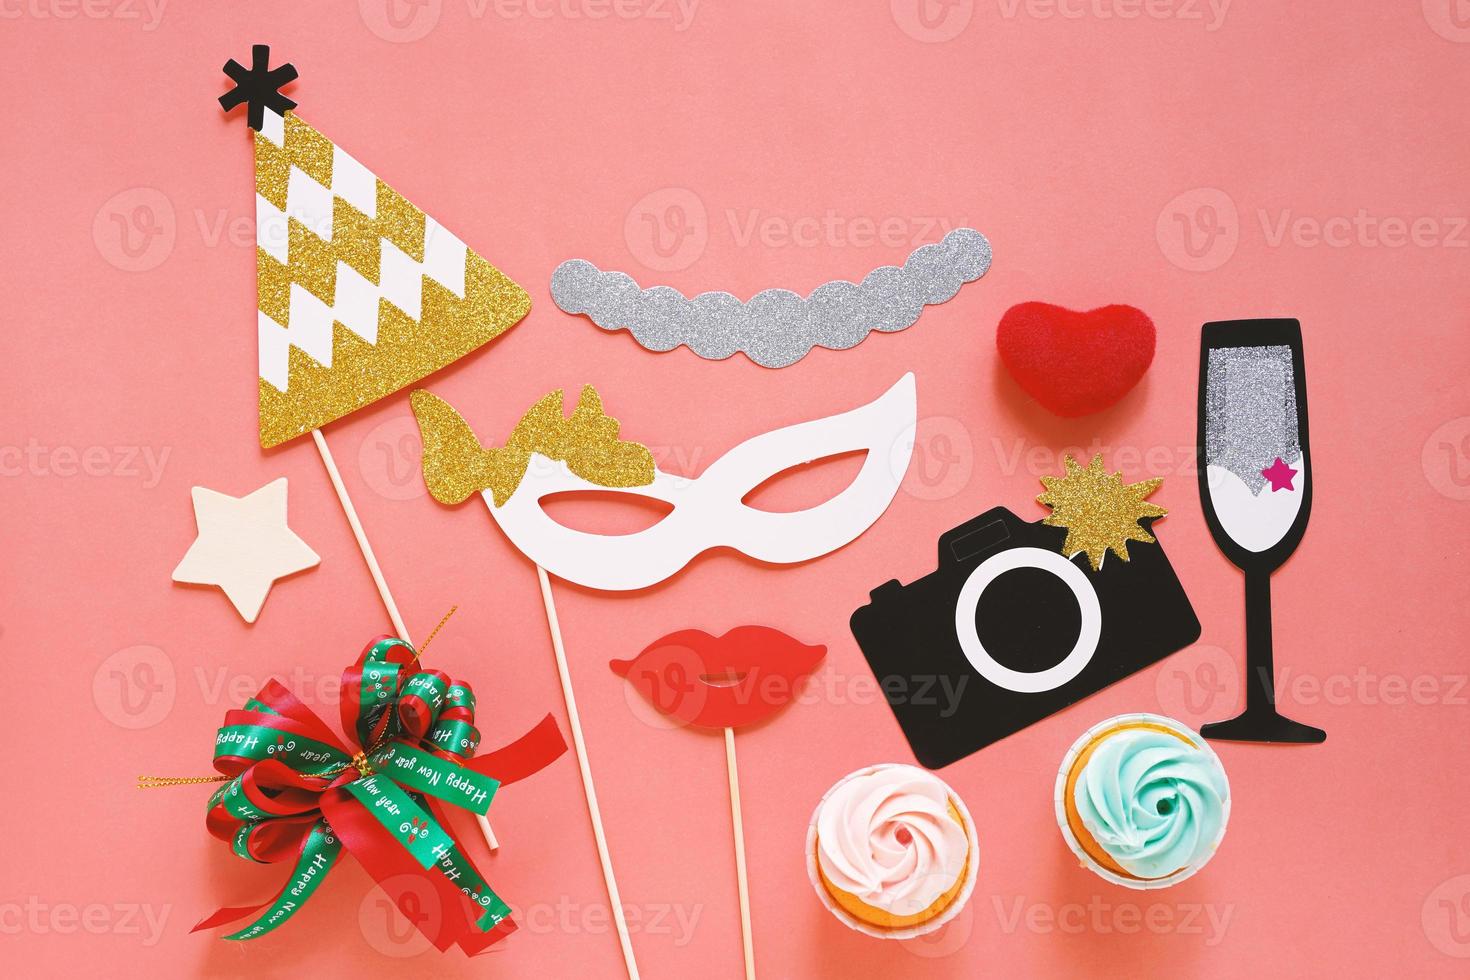 Cute party props and cake on colorful background, happy new year party celebration photo